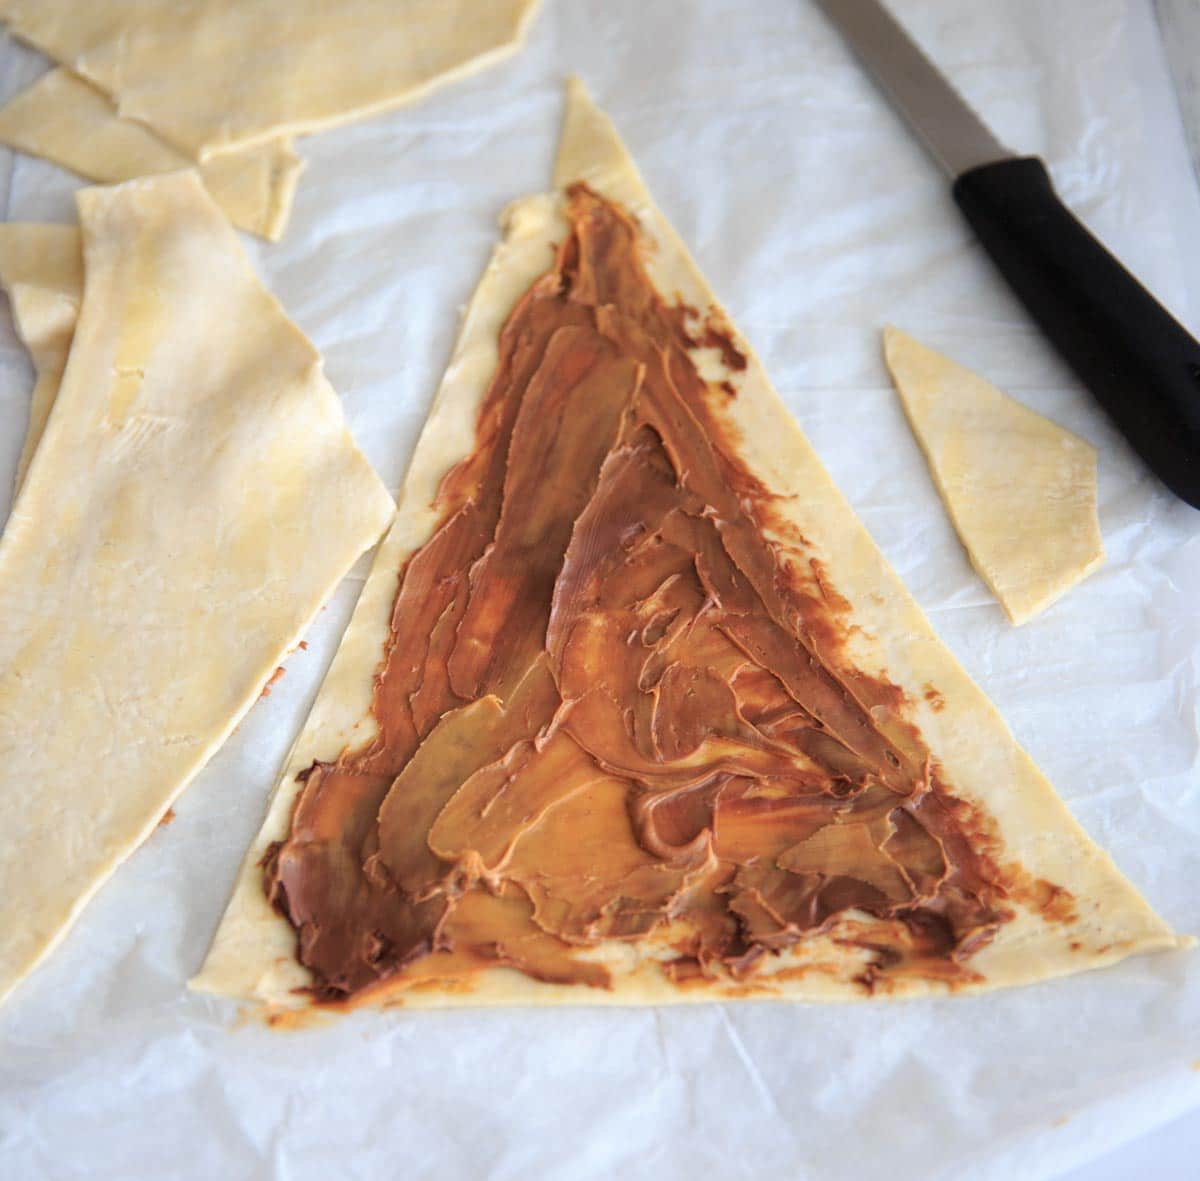 Add your filling - in this case, peanut butter and Nutella - to the puff pastry